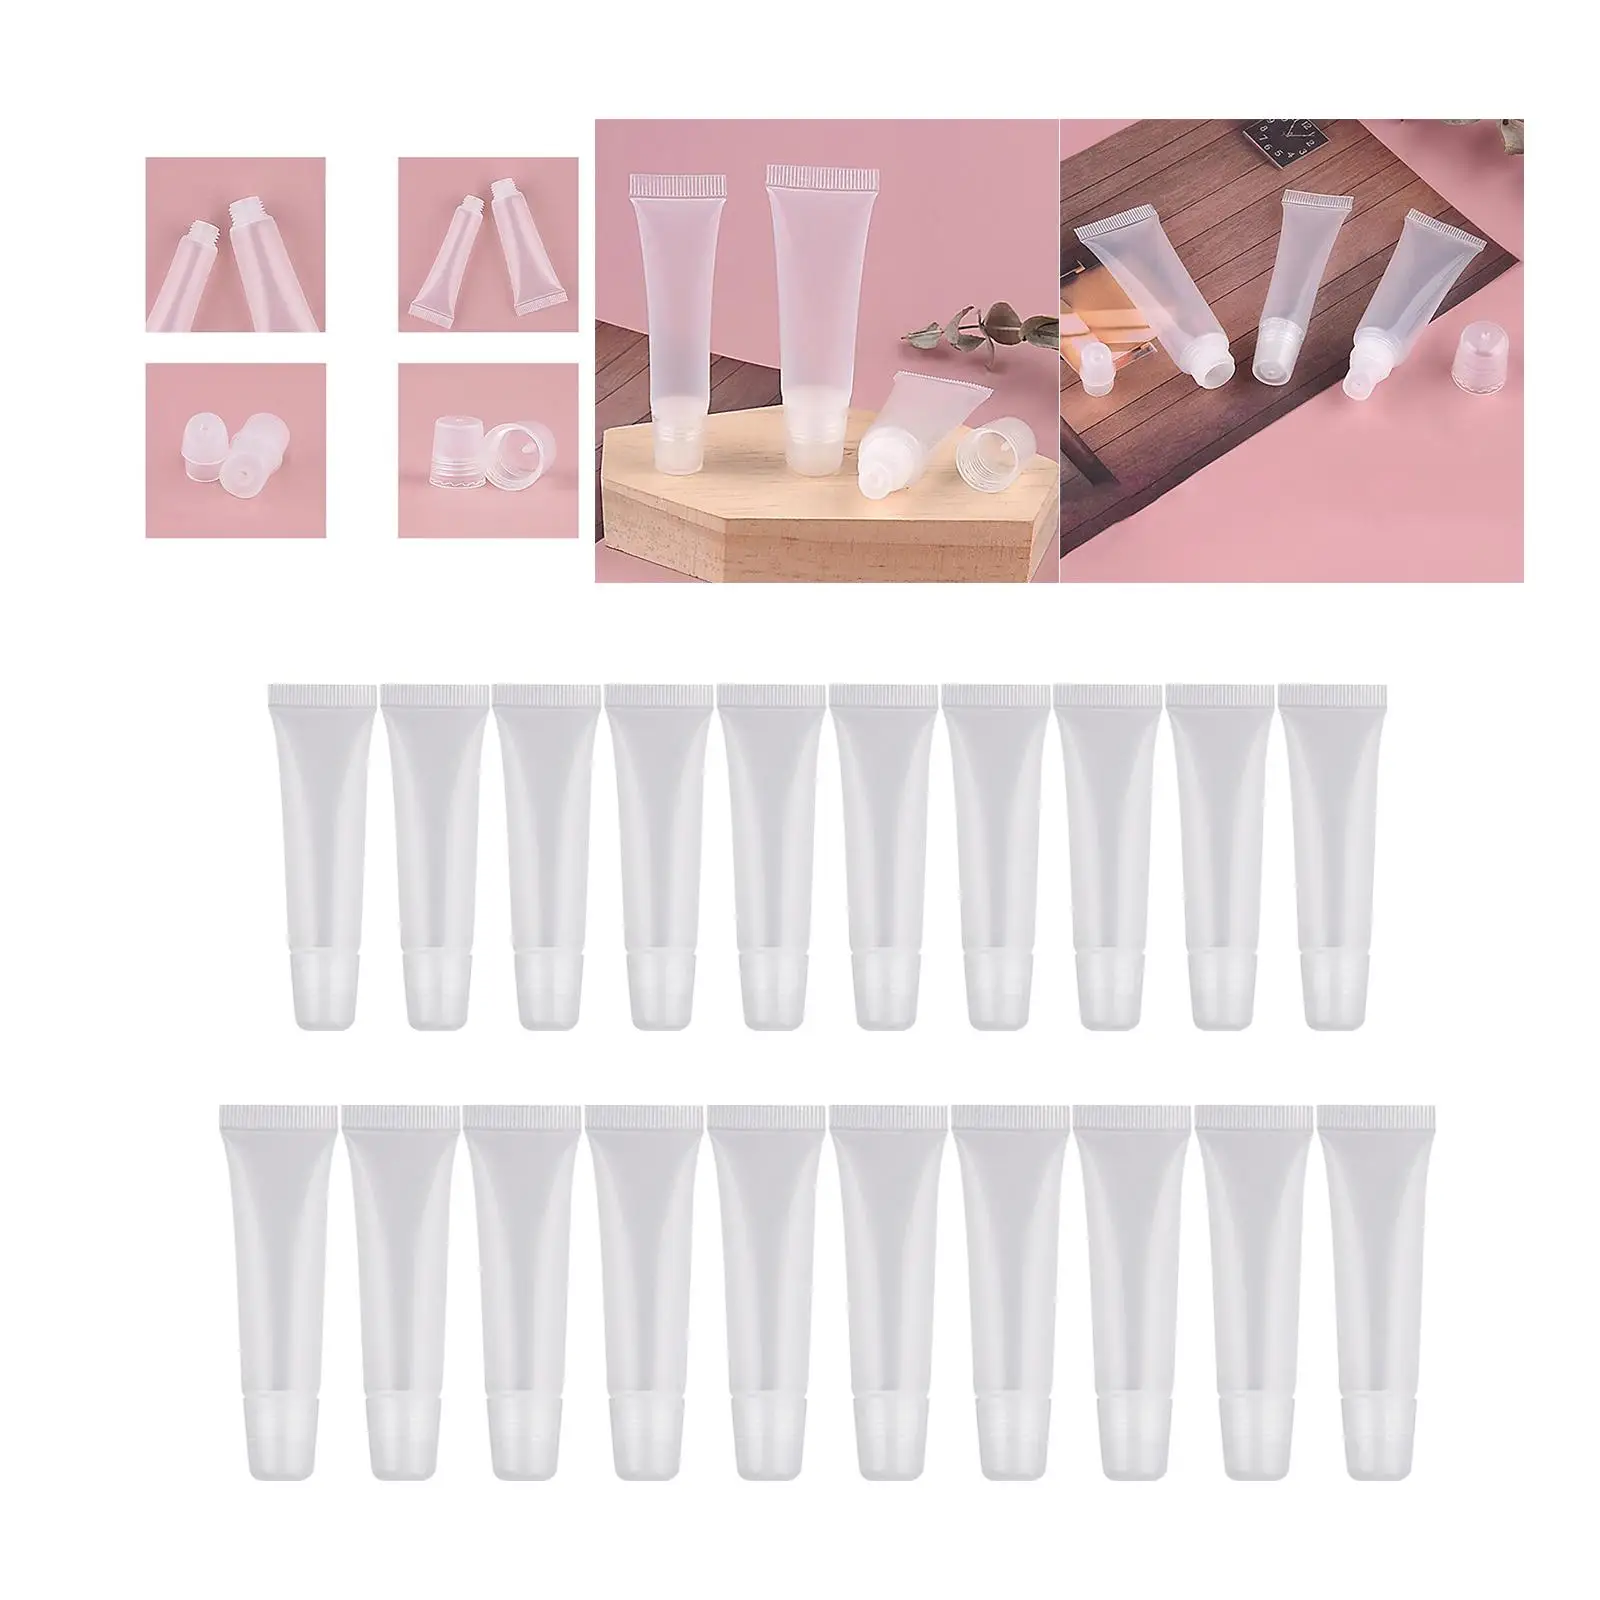 10x  Tubes  Tubes Empty Soft with Caps Portable Dispenser for DIY Lipgloss Base Travel Toiletries